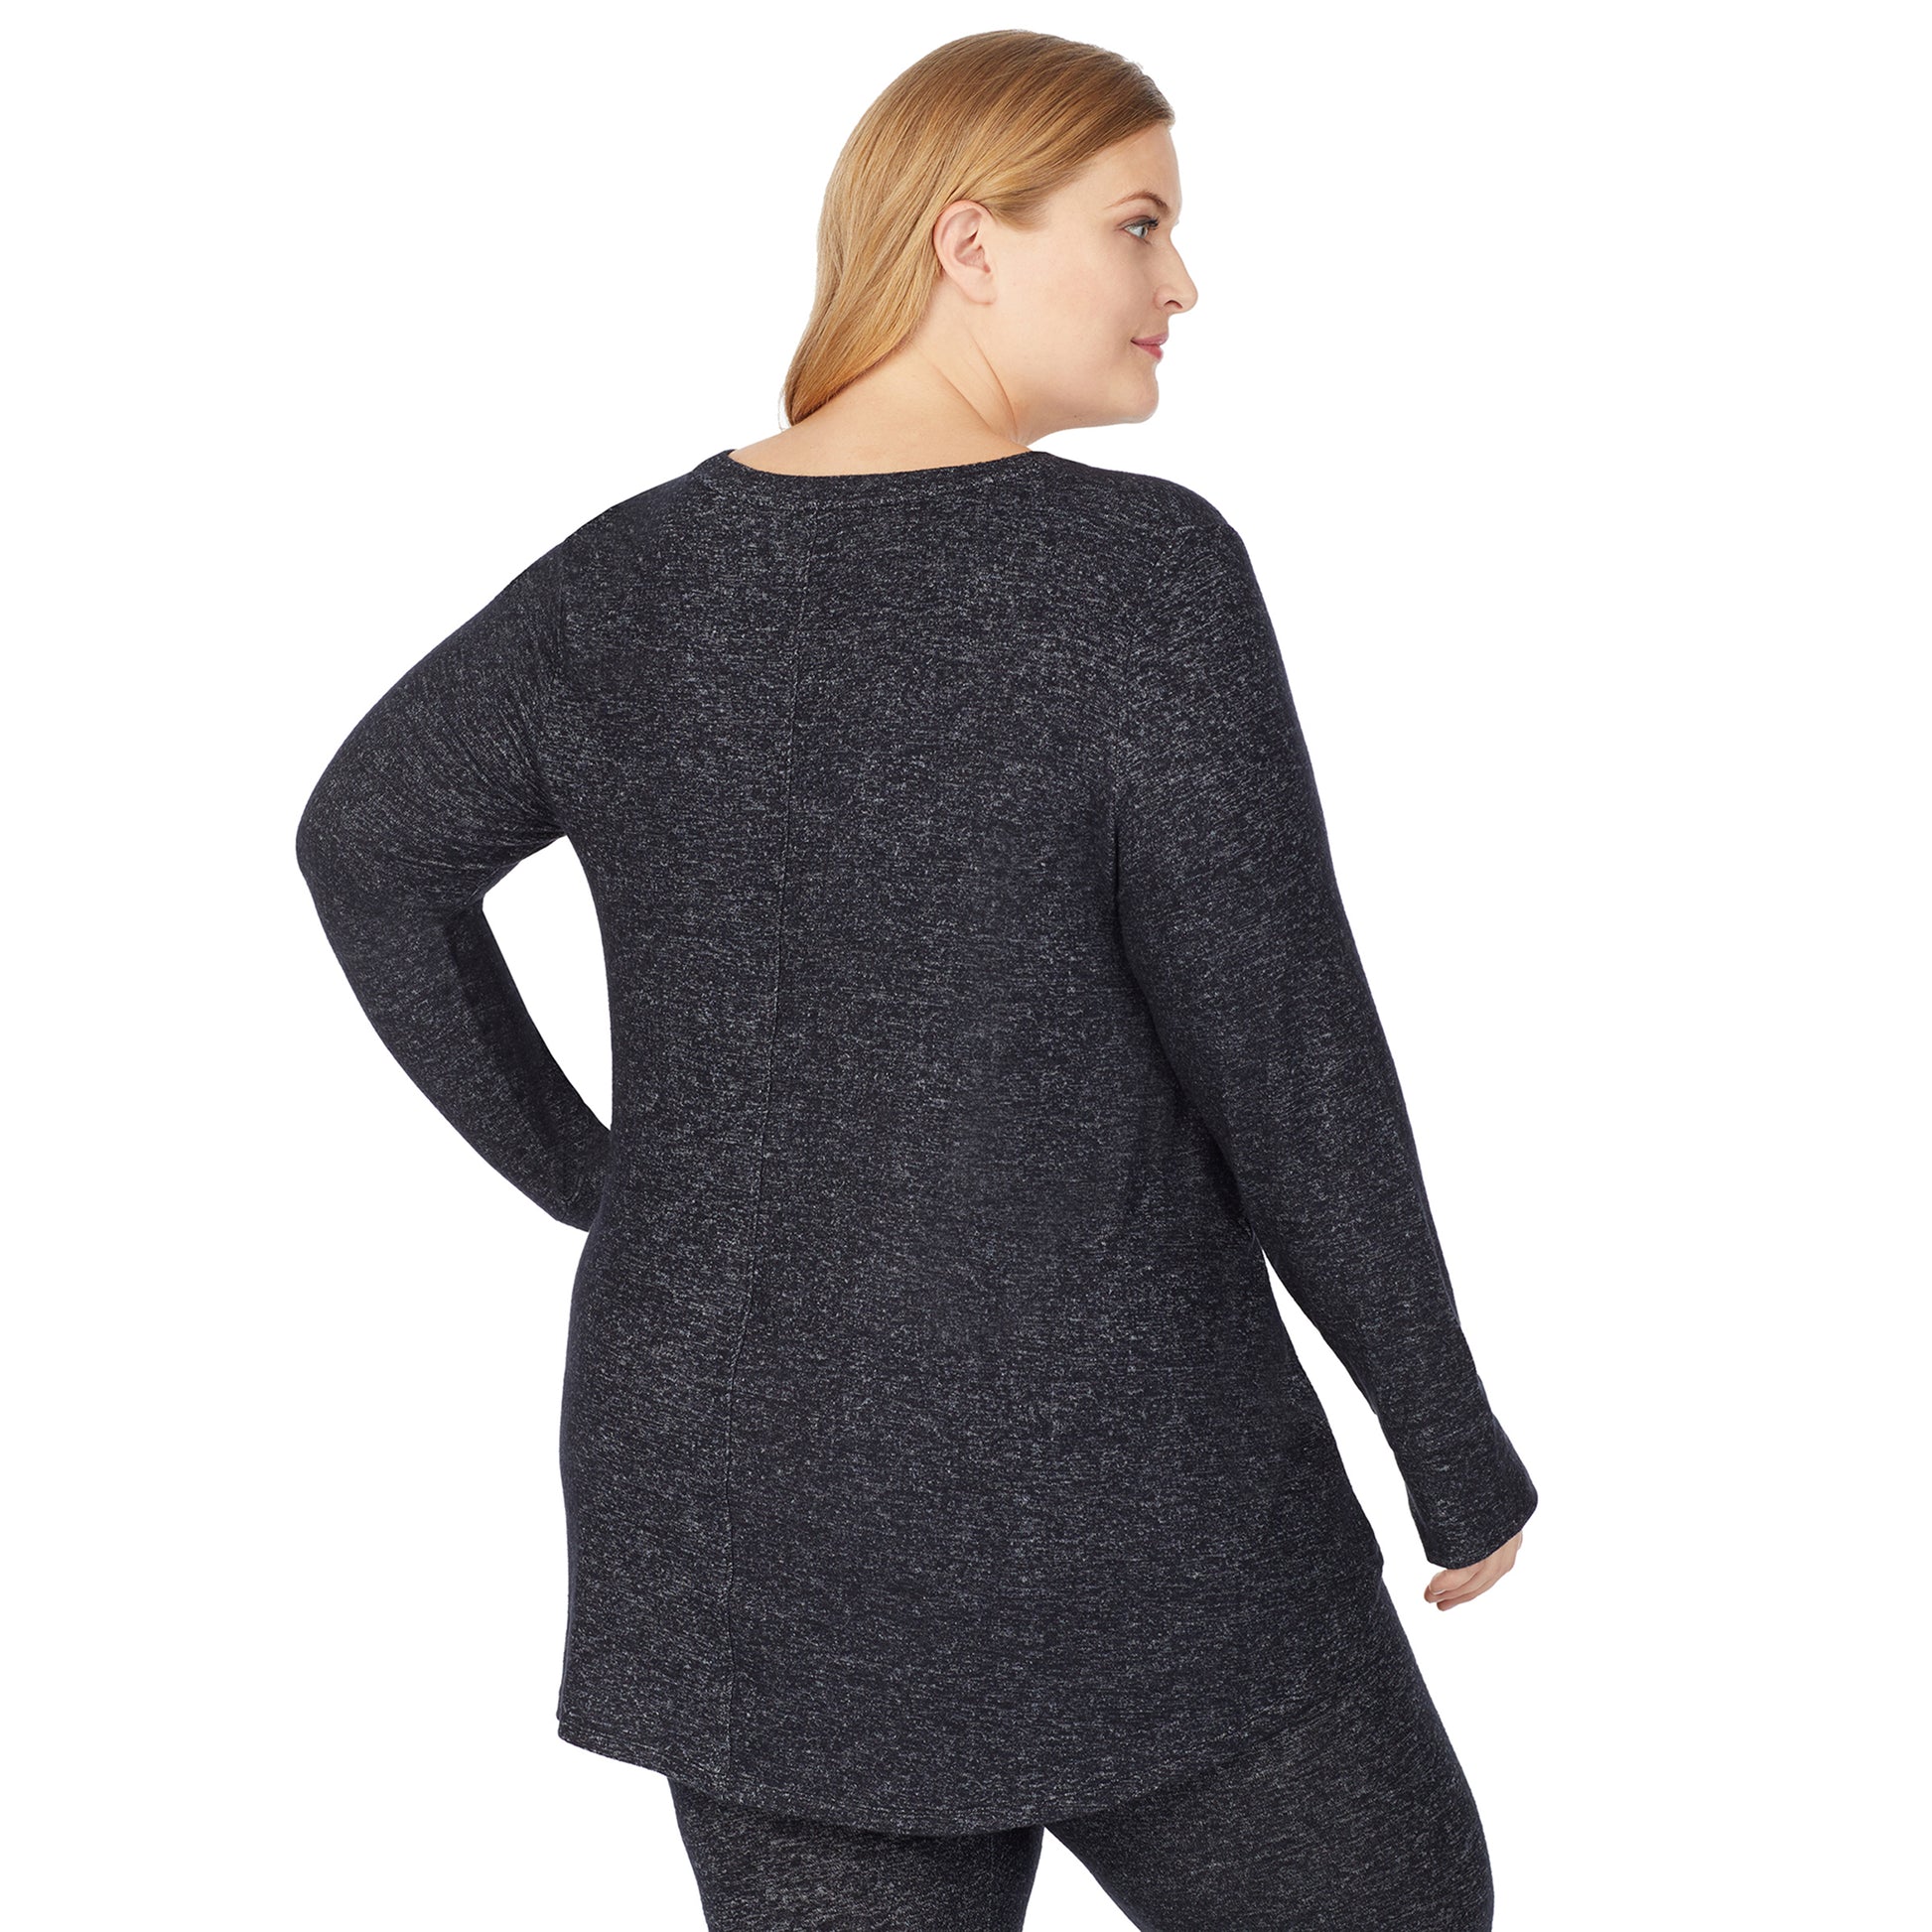 Marled Dark Charcoal; Model is wearing size 1X. She is 5'9", Bust 38", Waist 36", Hips 48.5". @A lady wearing a marled dark charcoal long sleeve tunic plus.